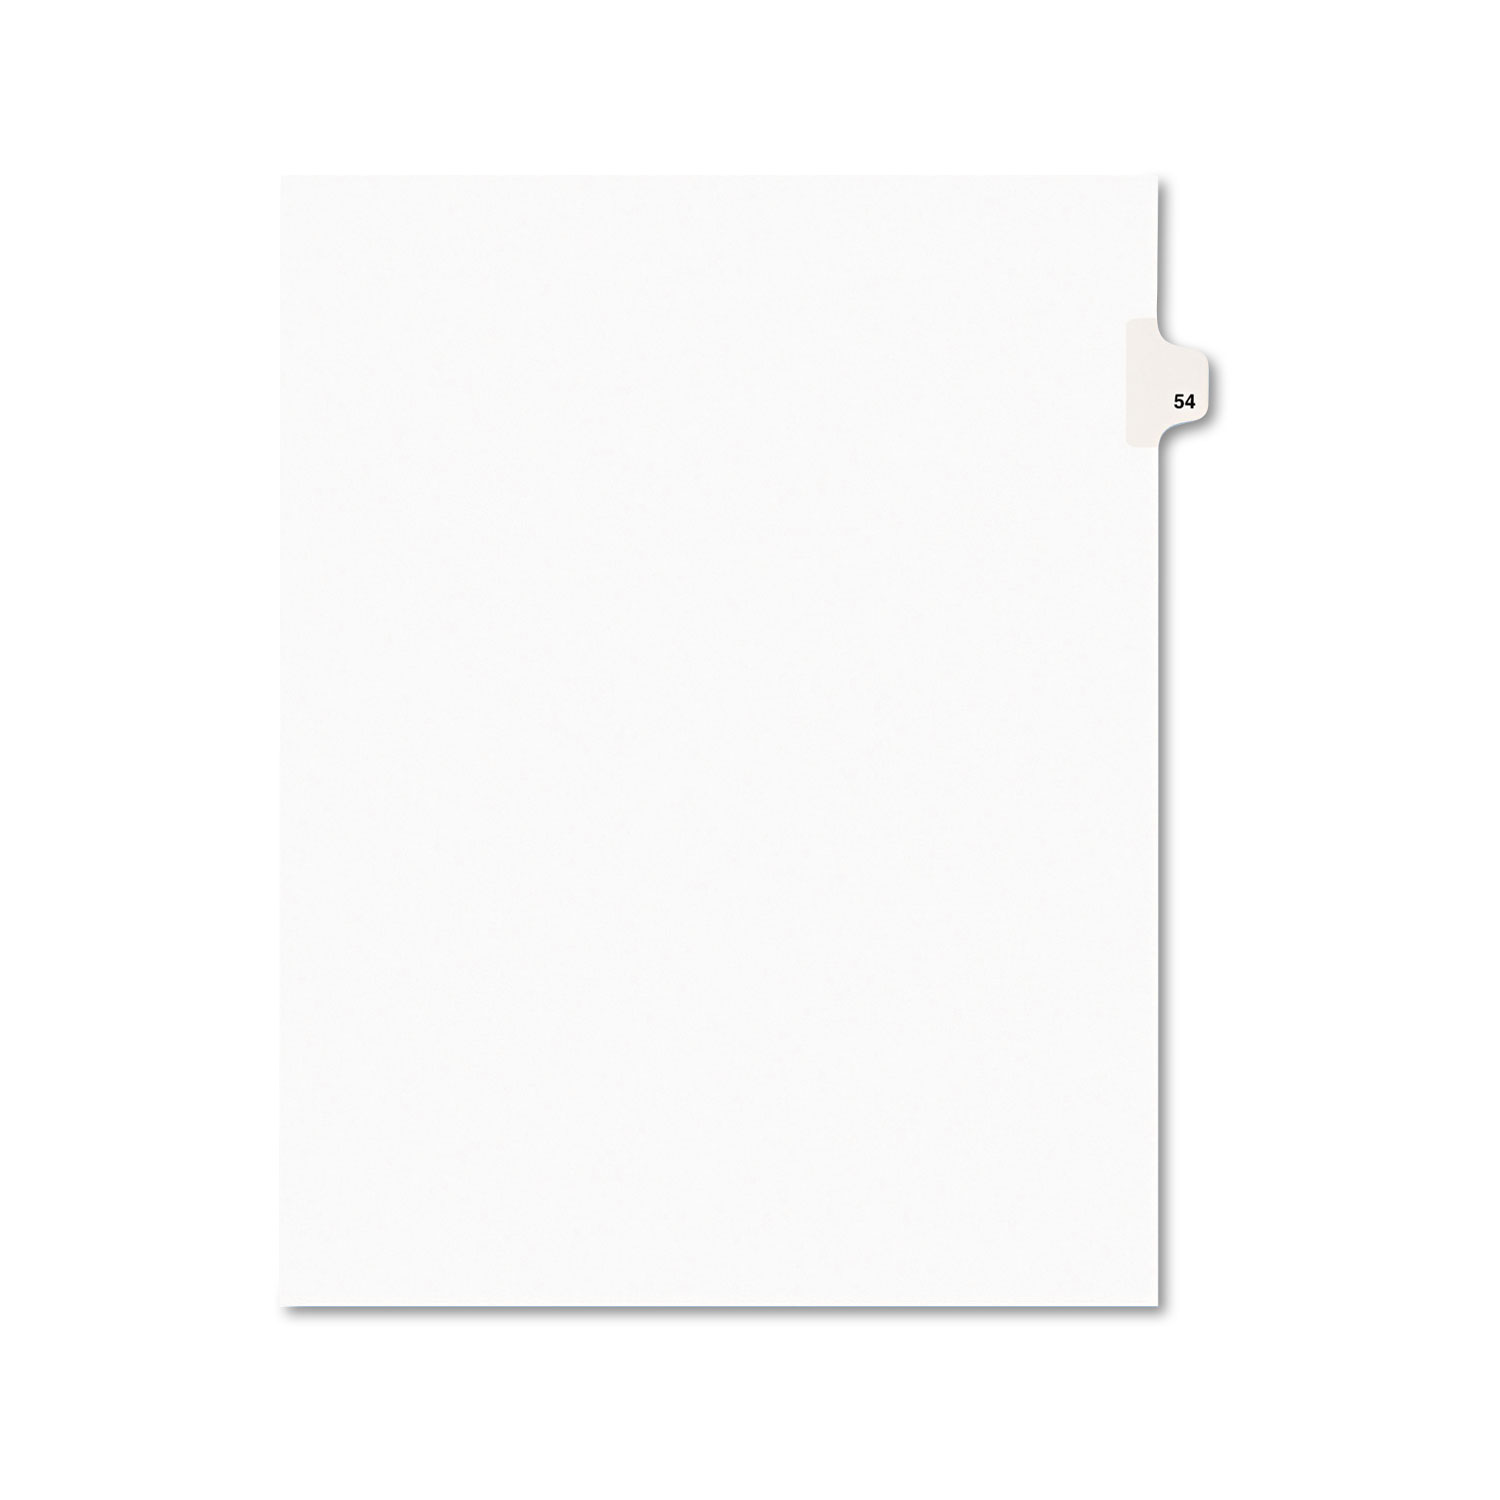  Avery 01054 Preprinted Legal Exhibit Side Tab Index Dividers, Avery Style, 10-Tab, 54, 11 x 8.5, White, 25/Pack (AVE01054) 